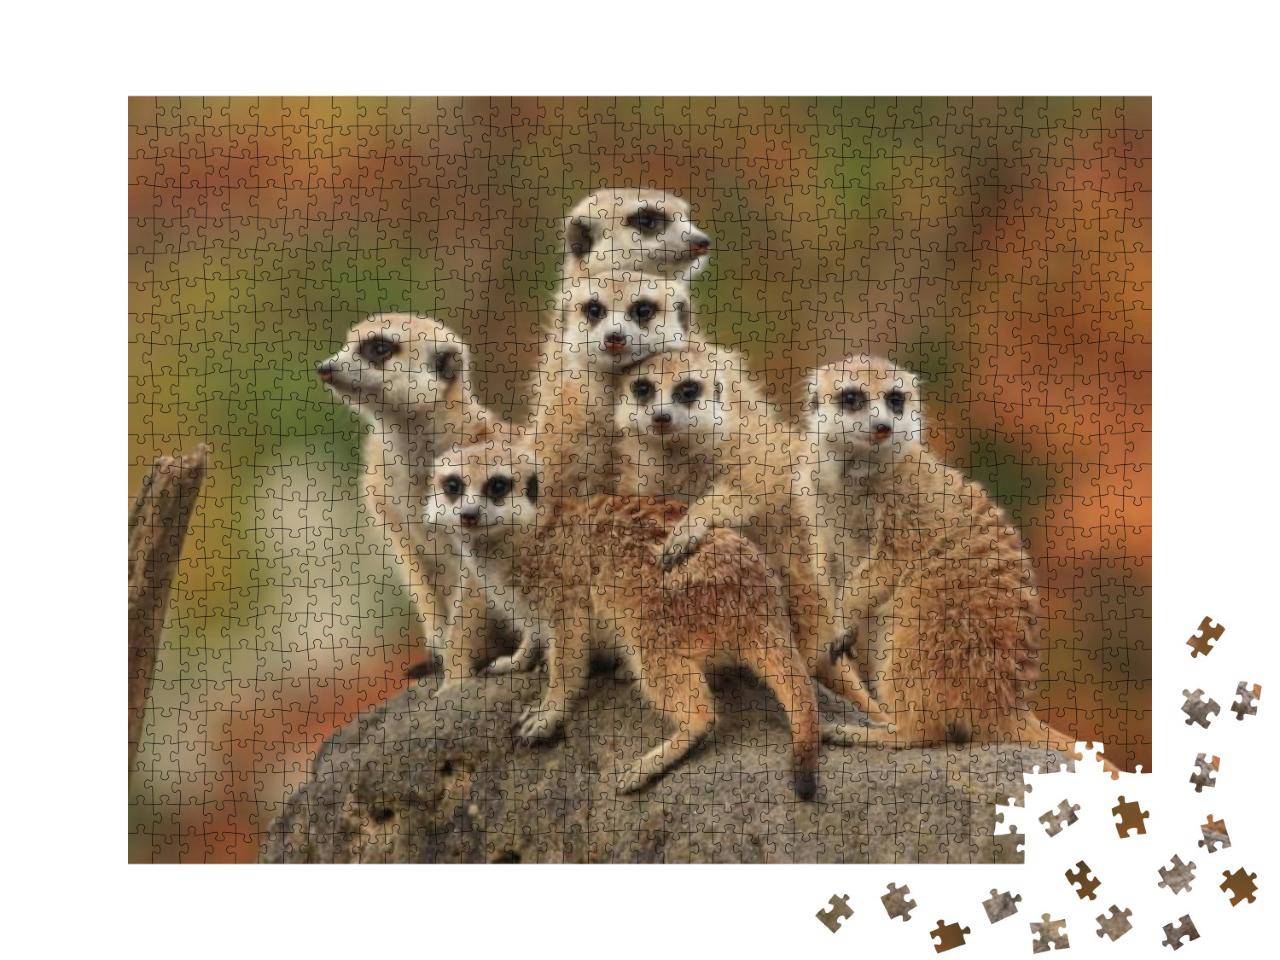 Group of Meerkat... Jigsaw Puzzle with 1000 pieces